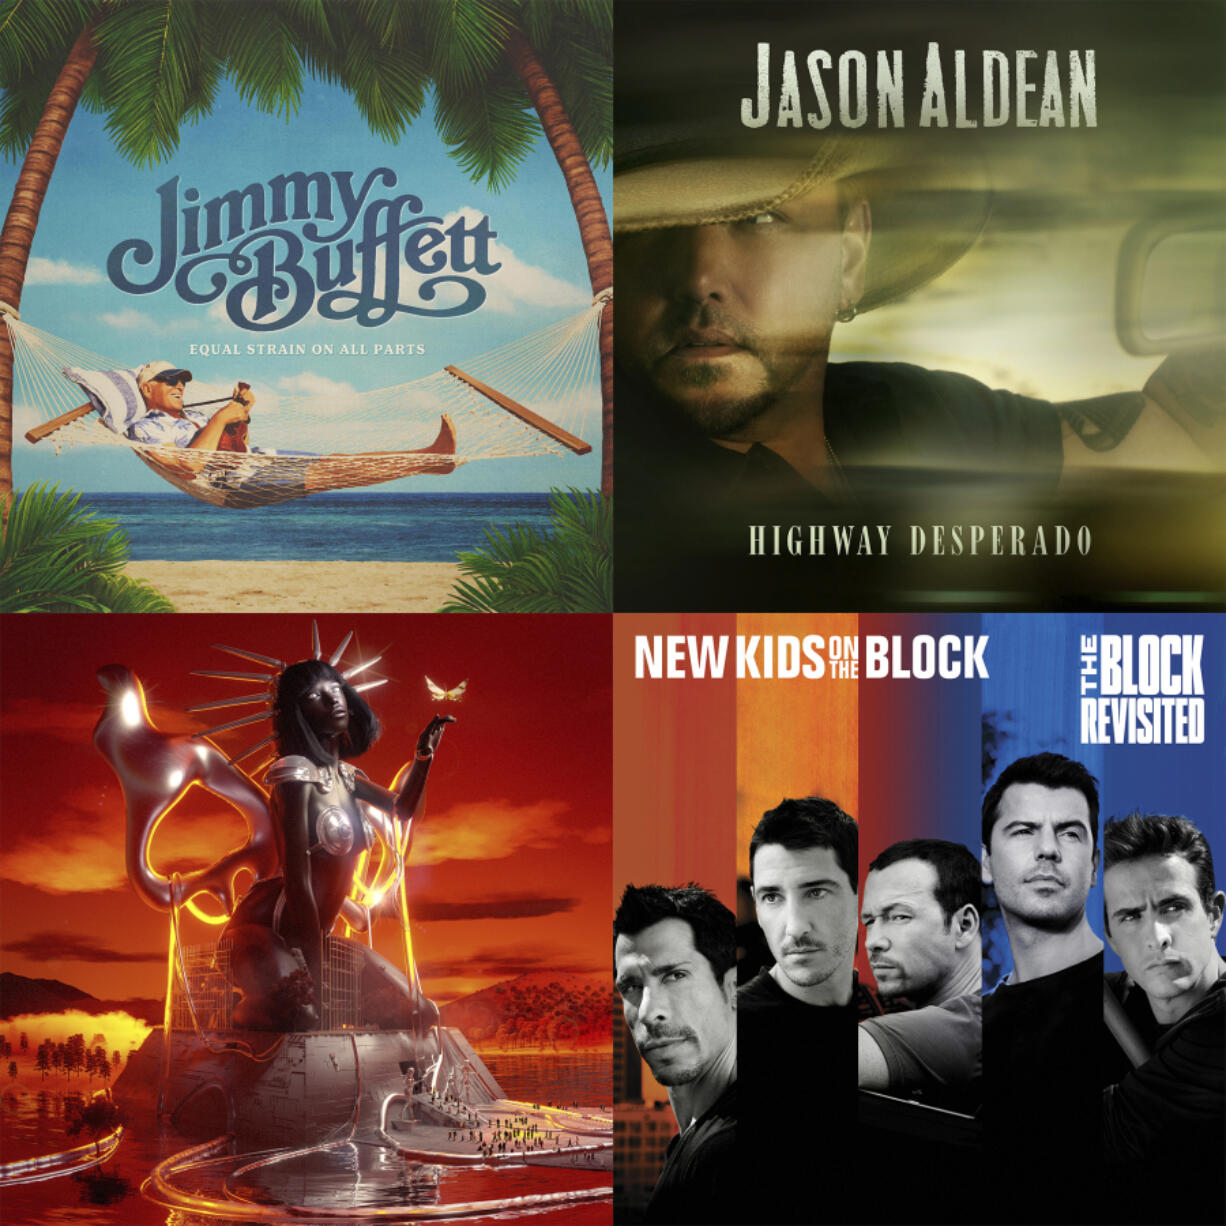 This combination of images shows album art for "Equal Strain on All Parts" by Jimmy Buffett, clockwise from top left, "Highway Desperado" by Jason Aldean, "The Block: Revisited" by New Kids on the Block and "Sweet Justice" by Tkay Maidza.